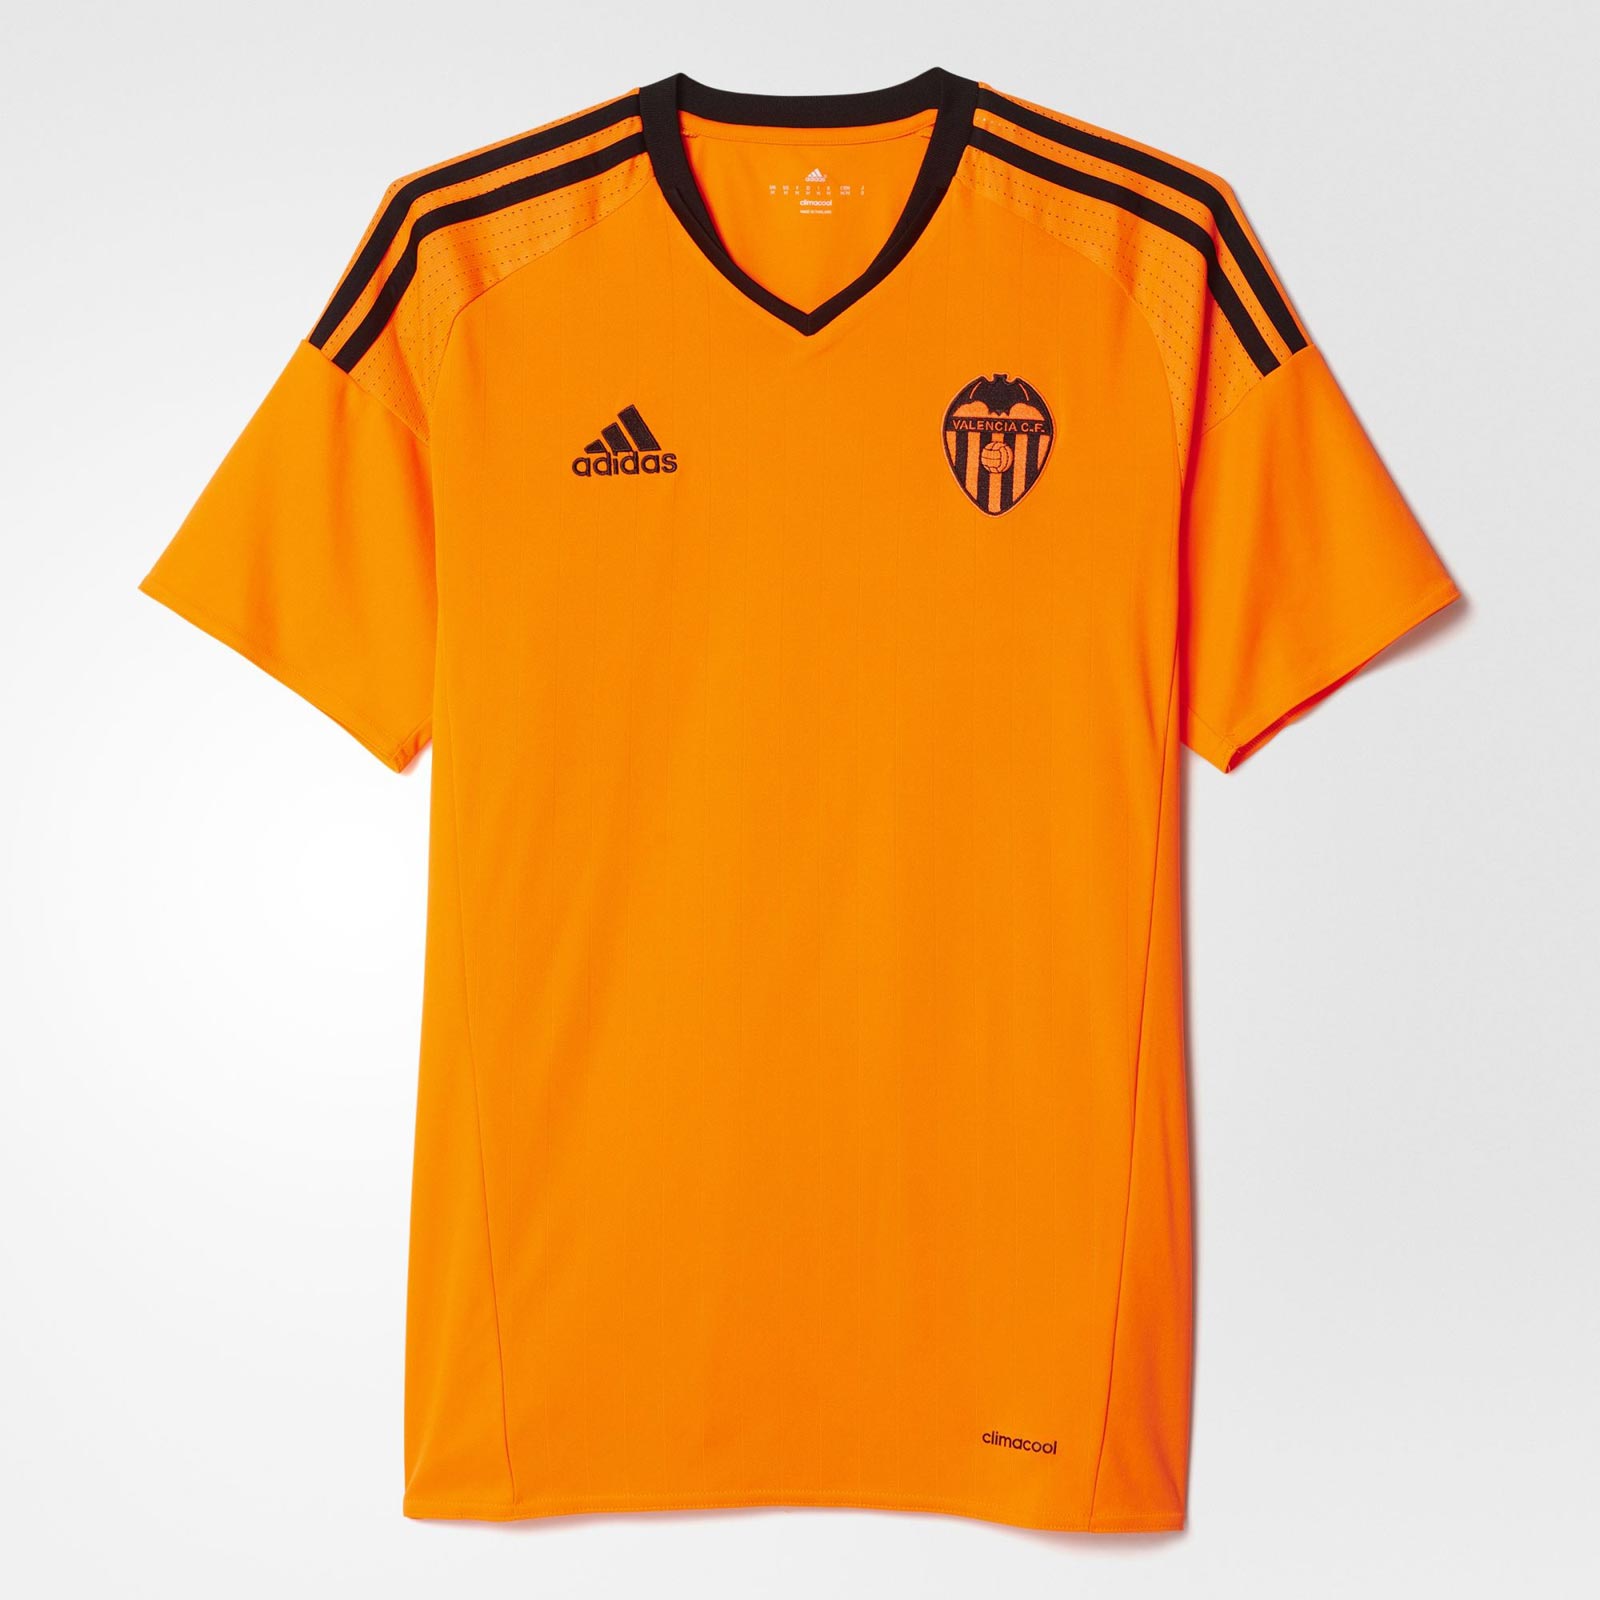 rejected-valencia-16-17-home-away-kits-4.jpg